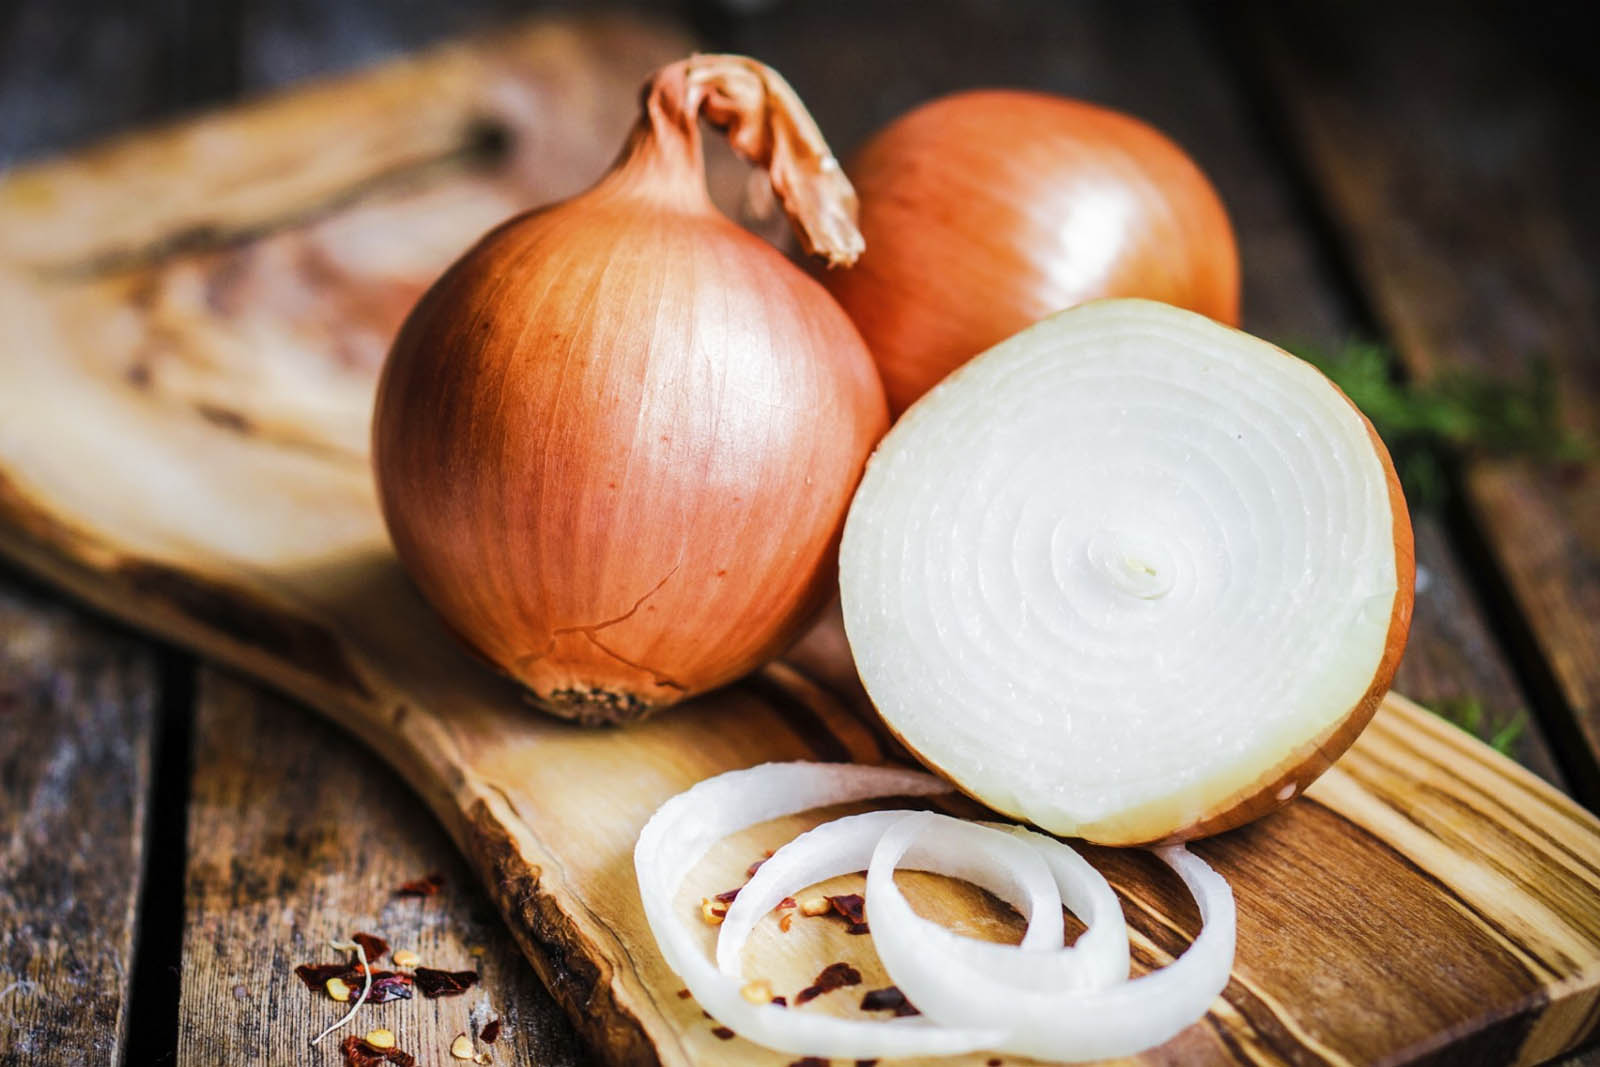 The Snacks You Love and the Veggies You Hate Will Determine Your Age With Alarming Accuracy Onions